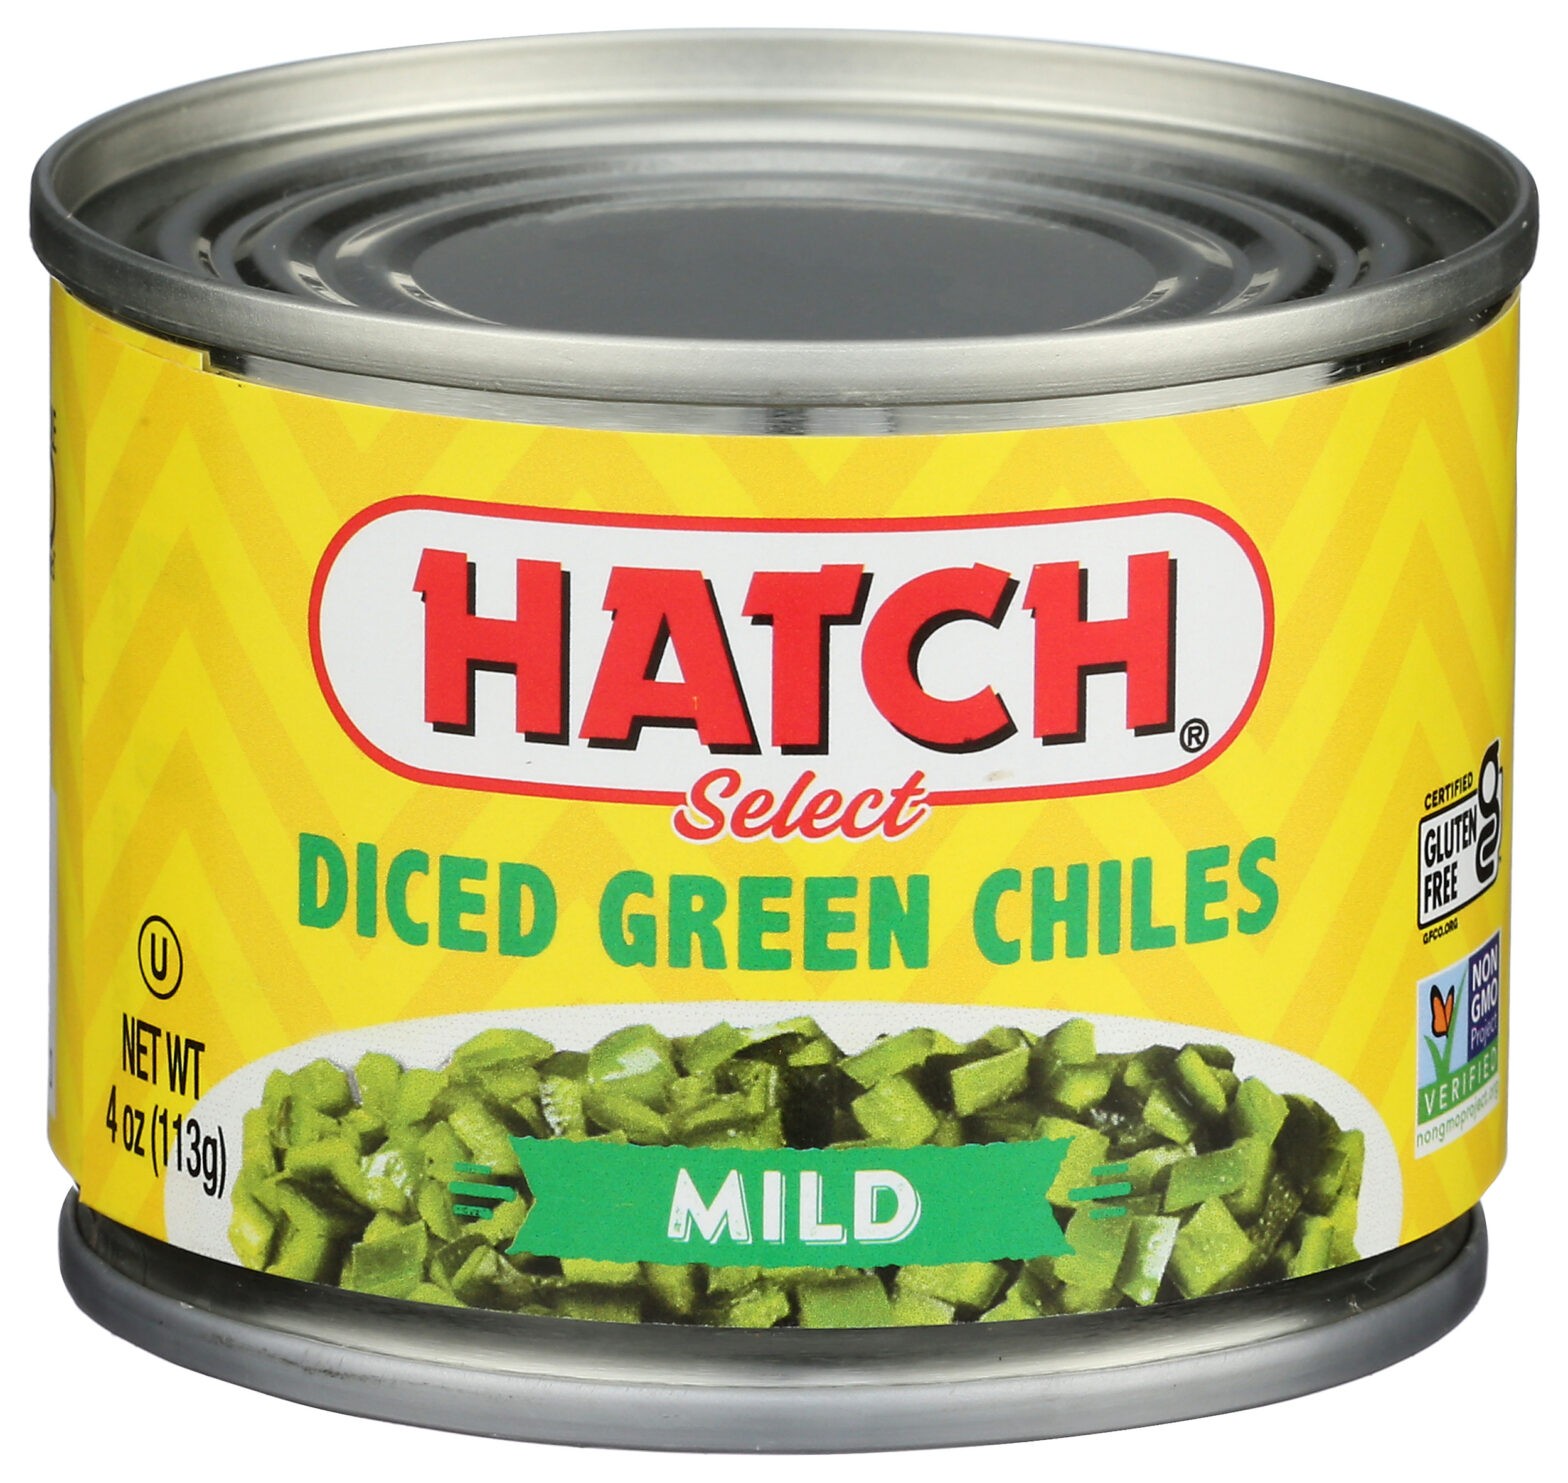 Featured image for post: Diced Green Chiles